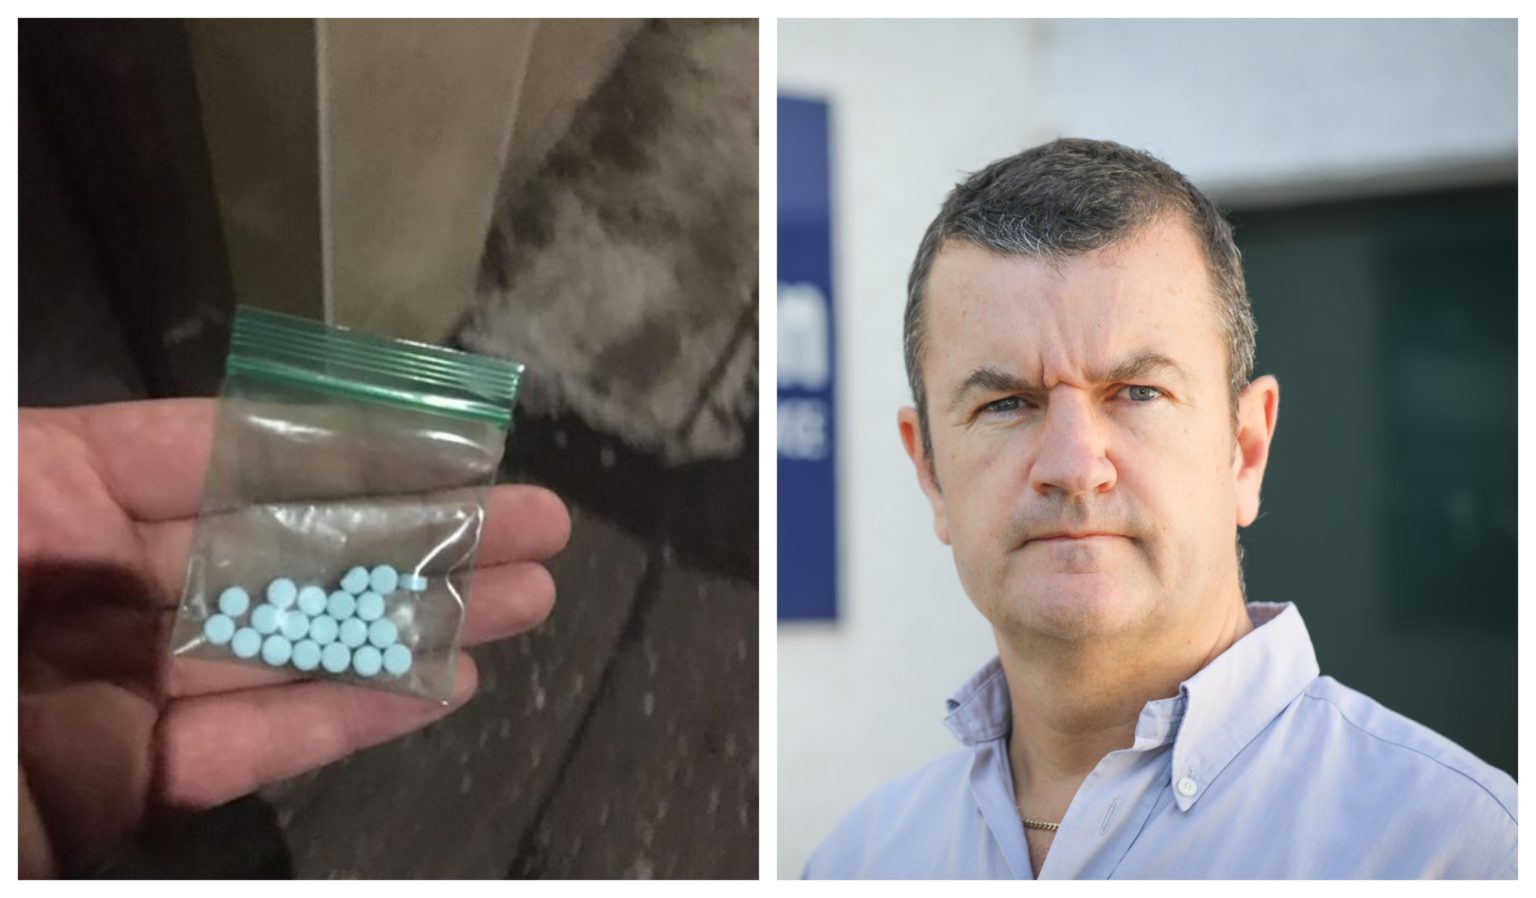 Claims Lethal Fake Valium Market In Dundee Sparked By Prescription